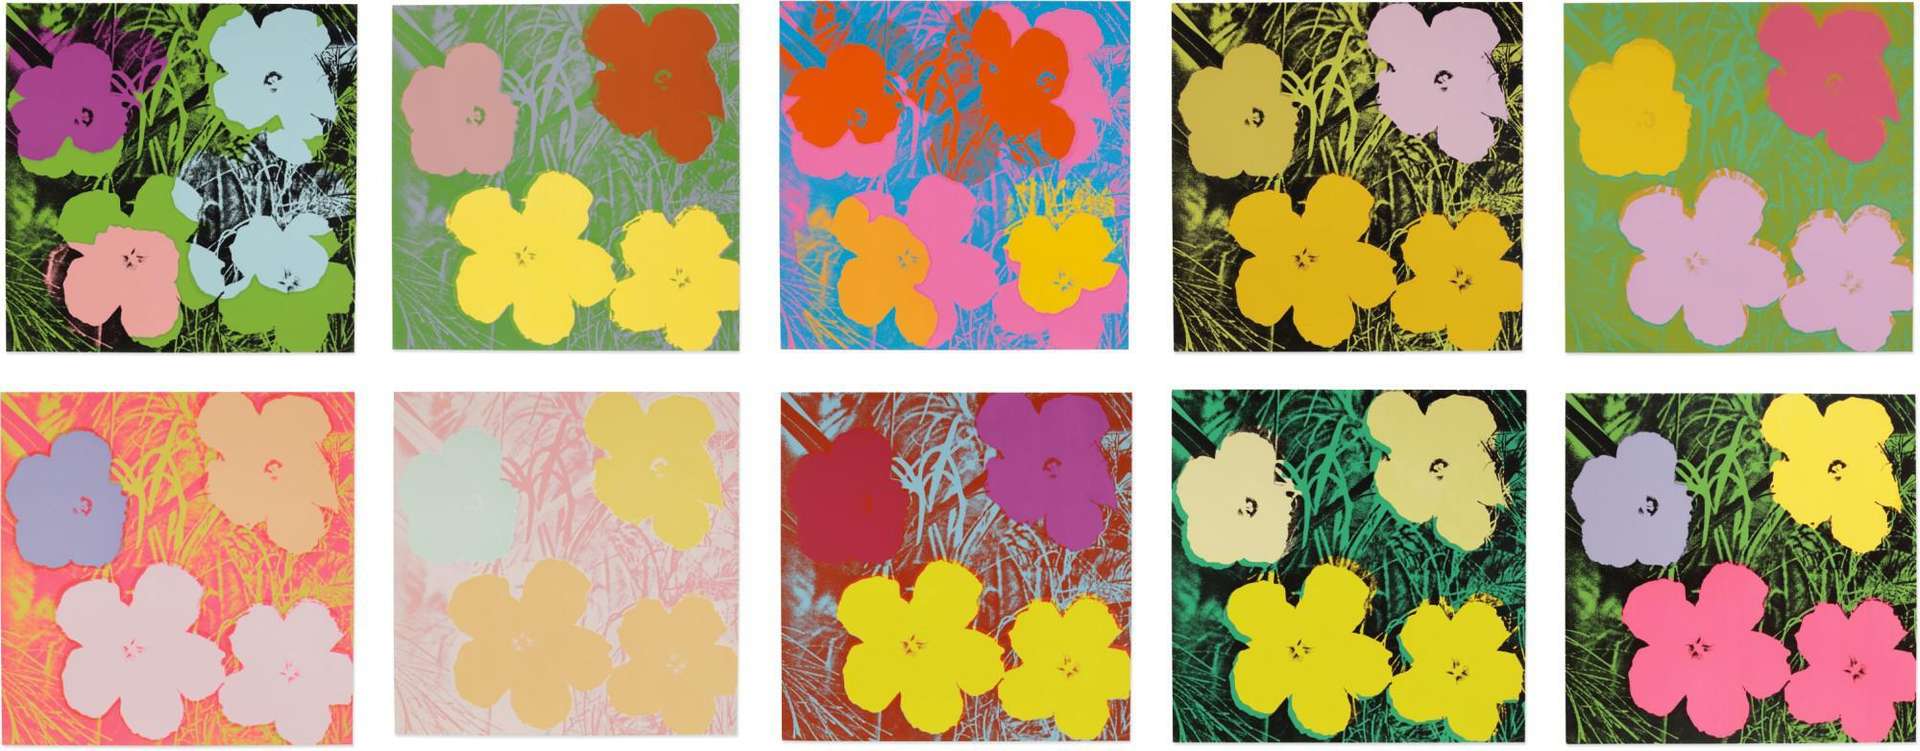 A complete set of Warhol's Flowers screen prints, depicting the same composition of four flowers against a grass background in various colour ways.